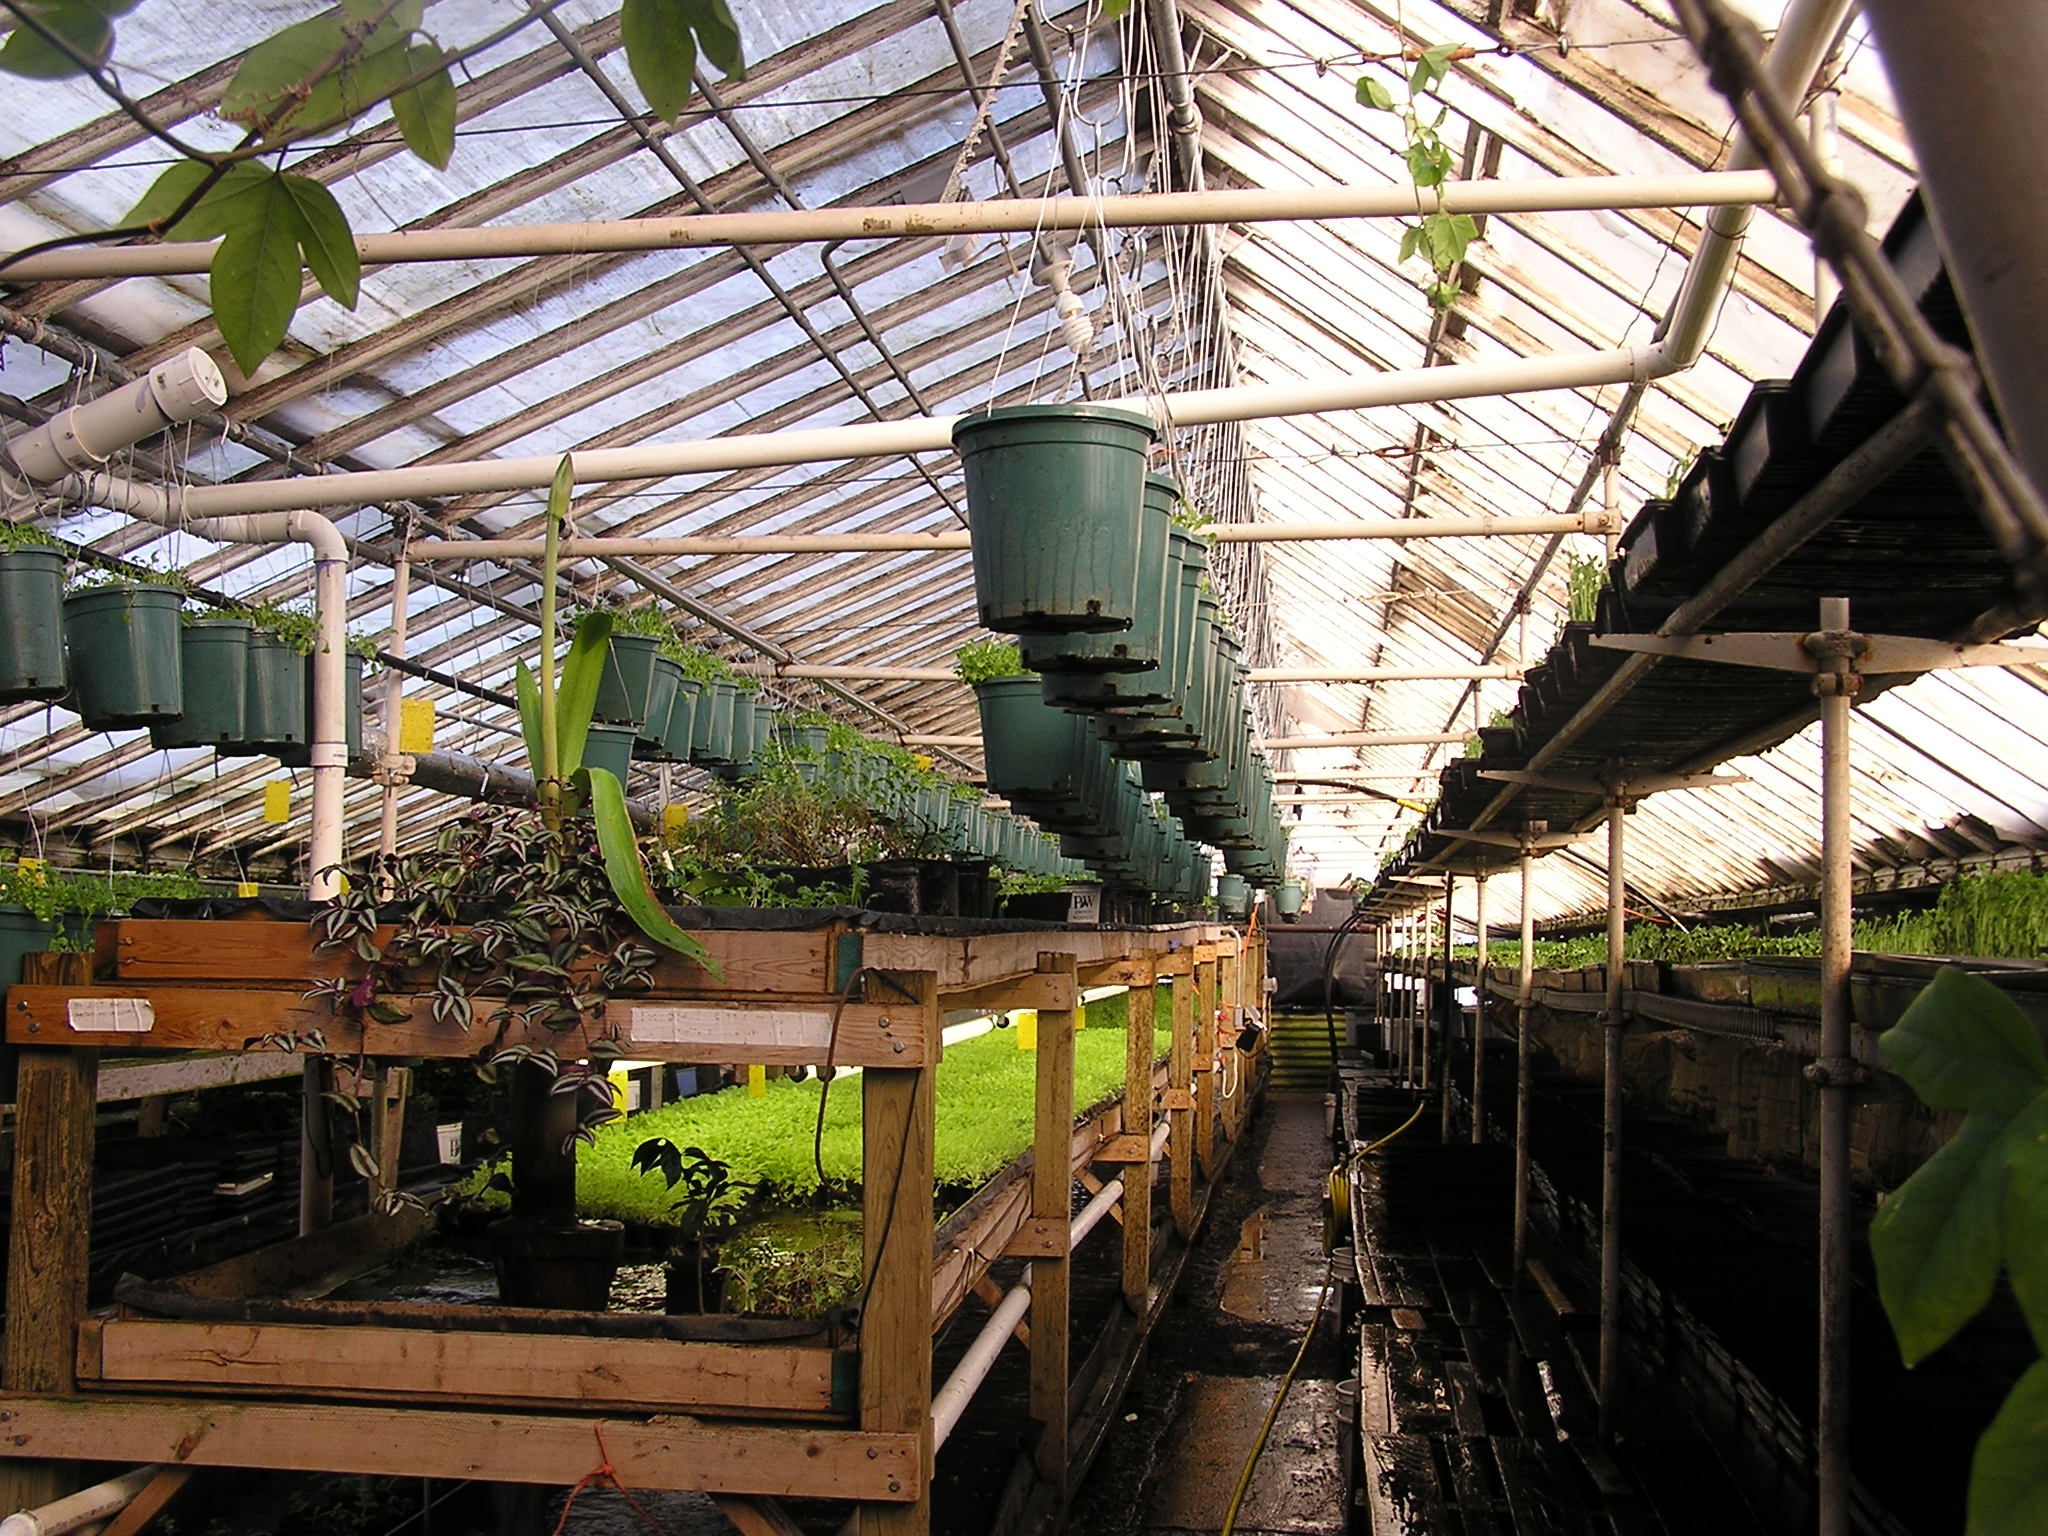 One of the greenhouses of Growing Power, a Milwaukee urban farm run by MacArthur Genius Grant recipient Will Allen. Photo courtesy Flickr user crfsproject. Used in accordance with Creative Commons guidelines.